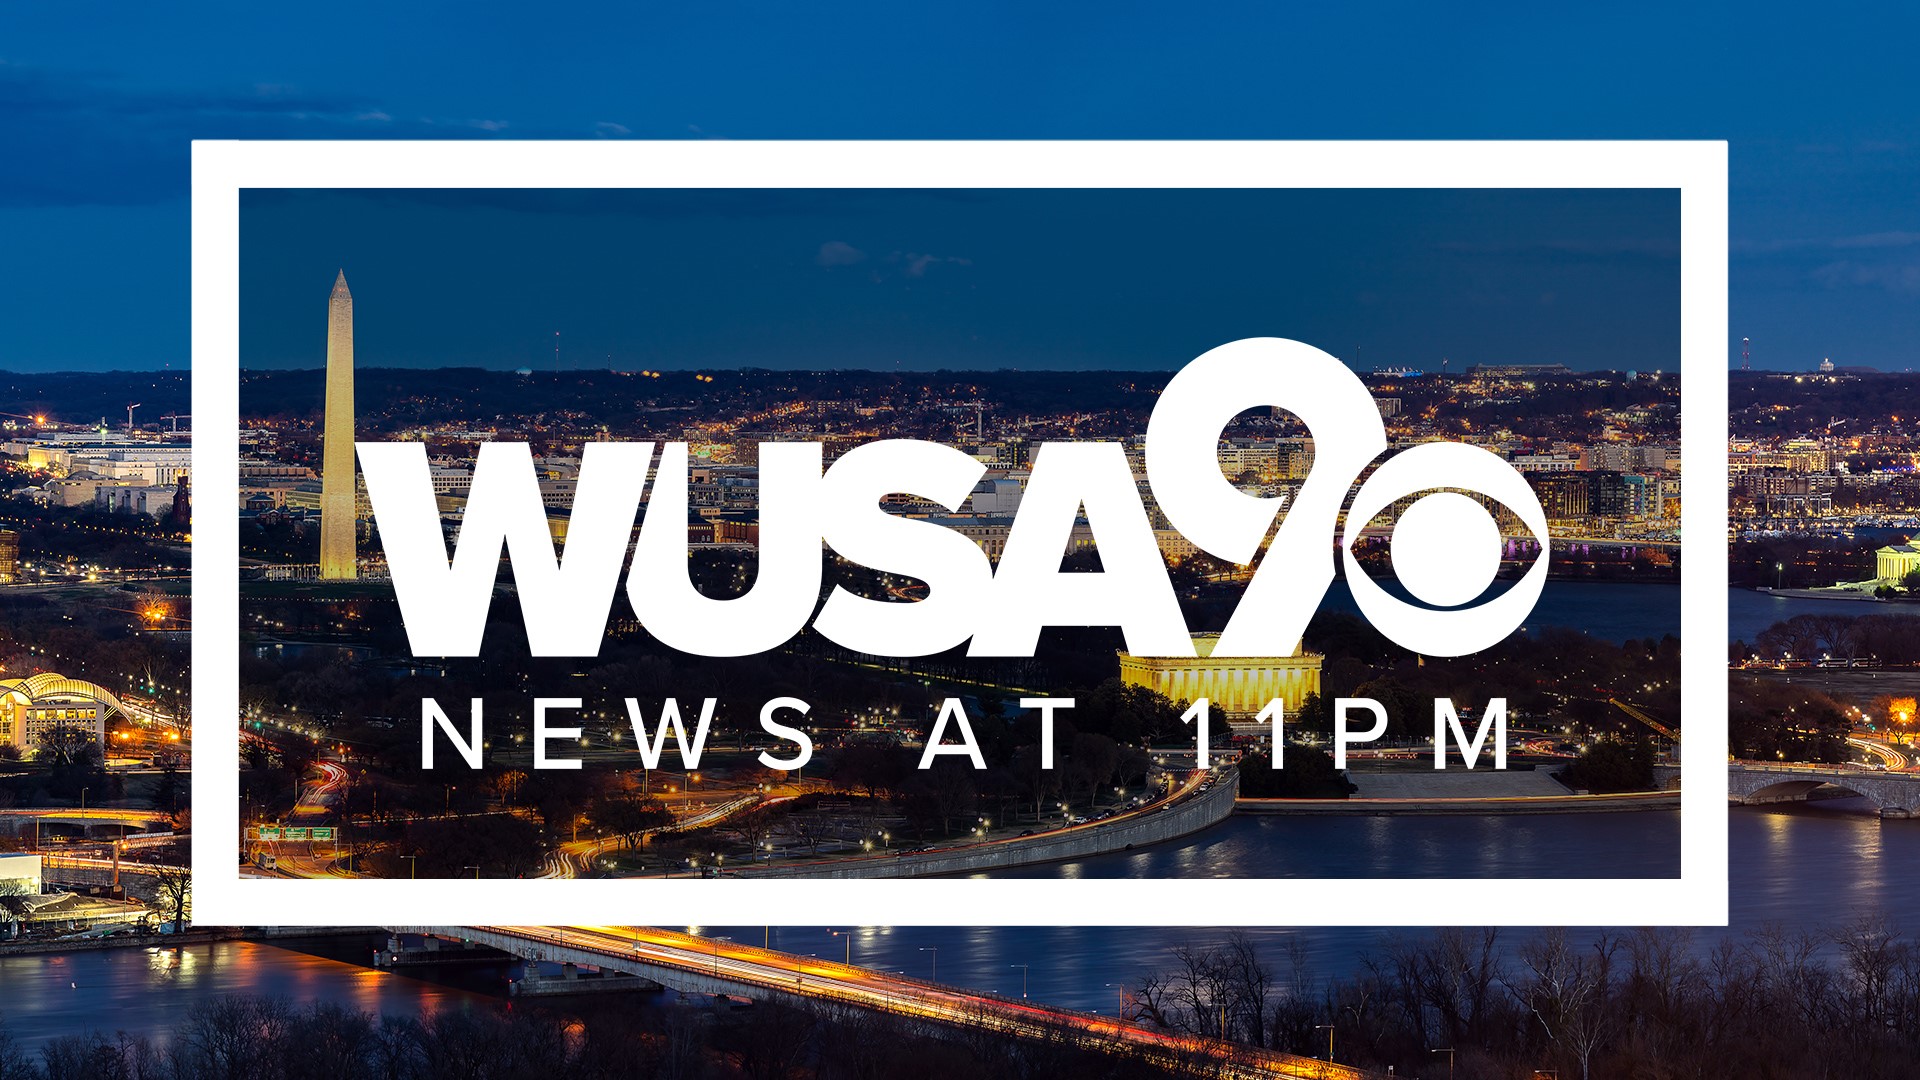 The WUSA9 News Team presents an evening newscast featuring breaking news, local and national events, with the most-accurate weather from around the Washington, D.C.,